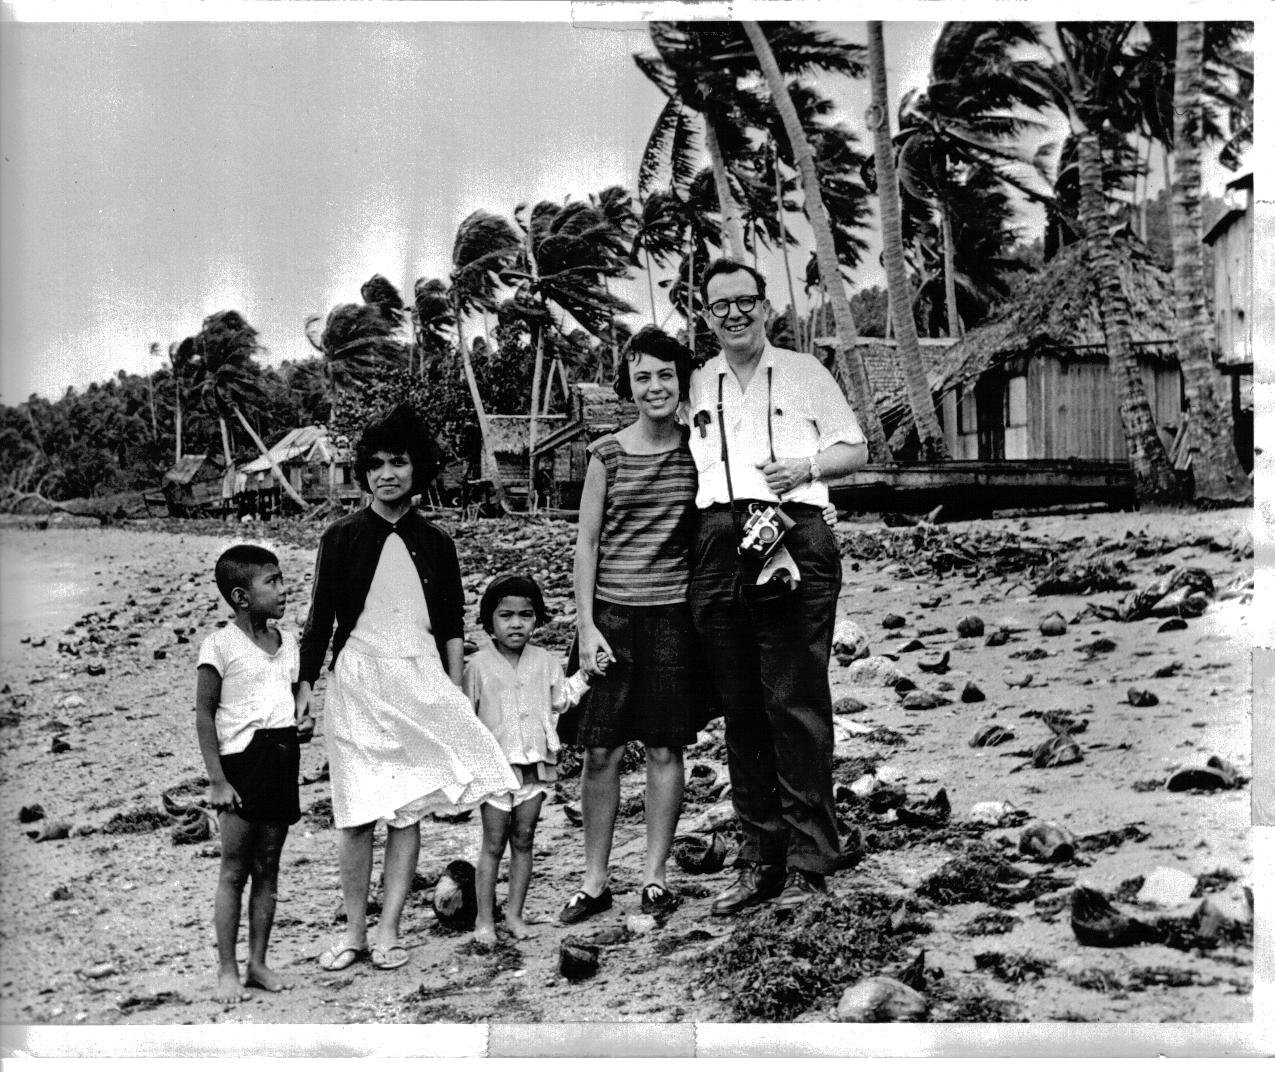 (Rt. to Lft.) Pam Benson with her father Jeffery Cohelan, and members of her host family. Barrio Inaclagan, Philippines.